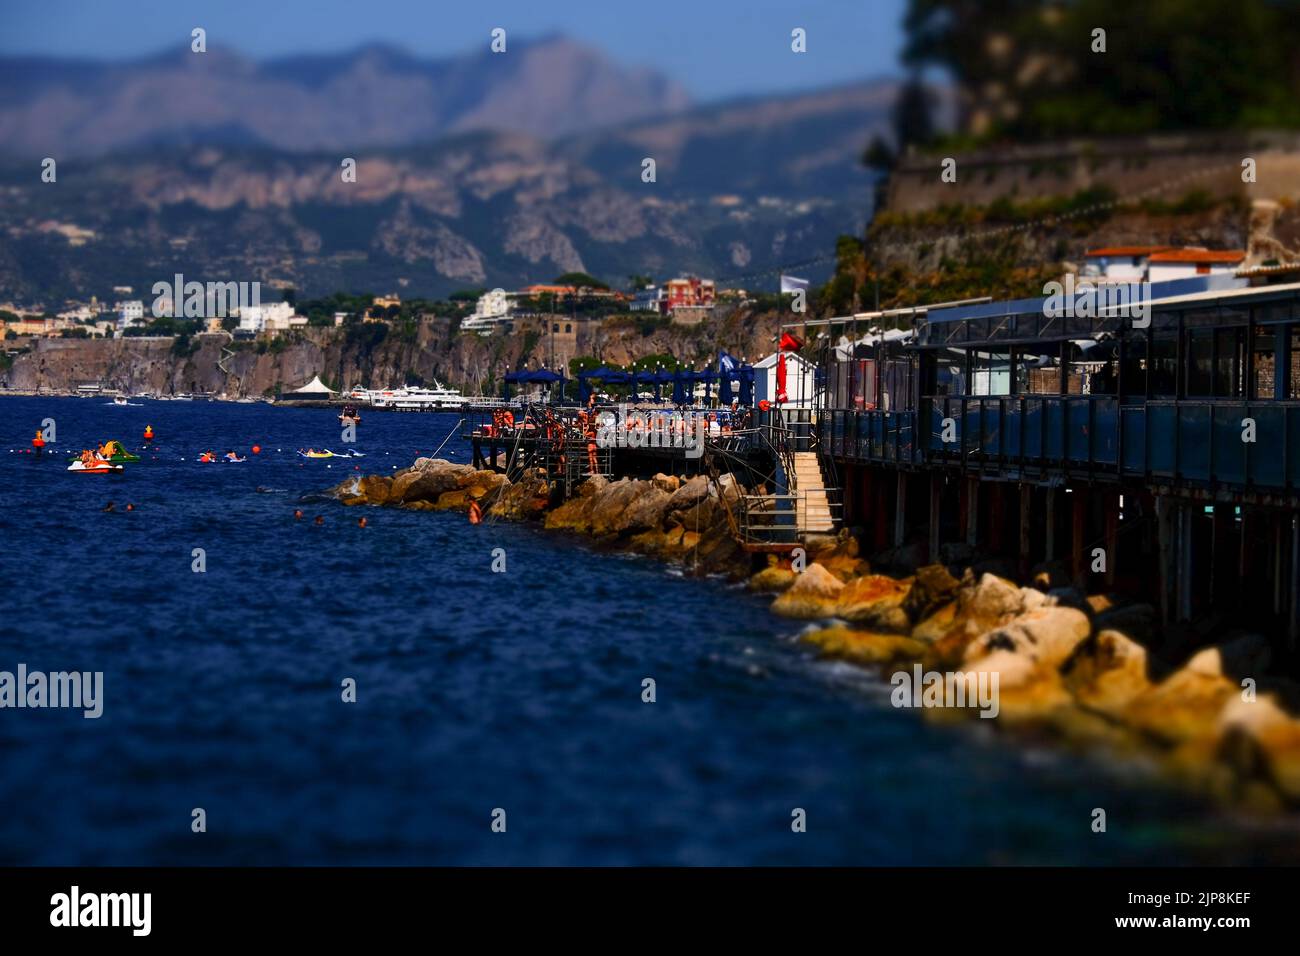 A private coastal beach club near Marina Grande in Sorrento southern Italy with the Lattari mountains and Sorrento peninsular  in the background. Stock Photo